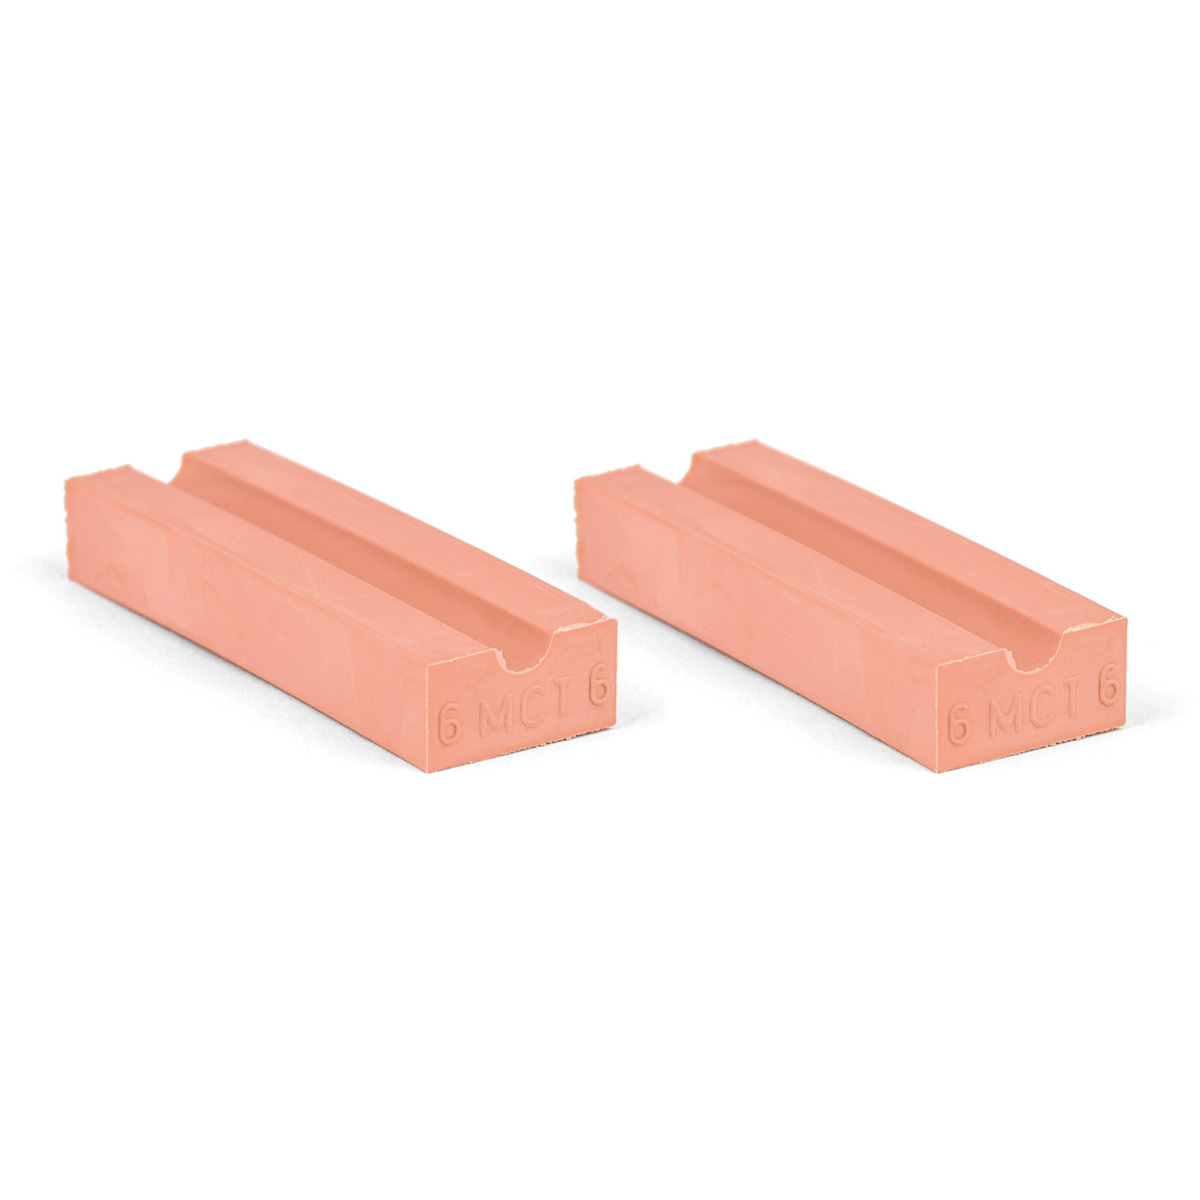 20-06*2 Set of 2 half insert block lycron, 20-06 for cable/pipe diam. 5.5-6.5mm